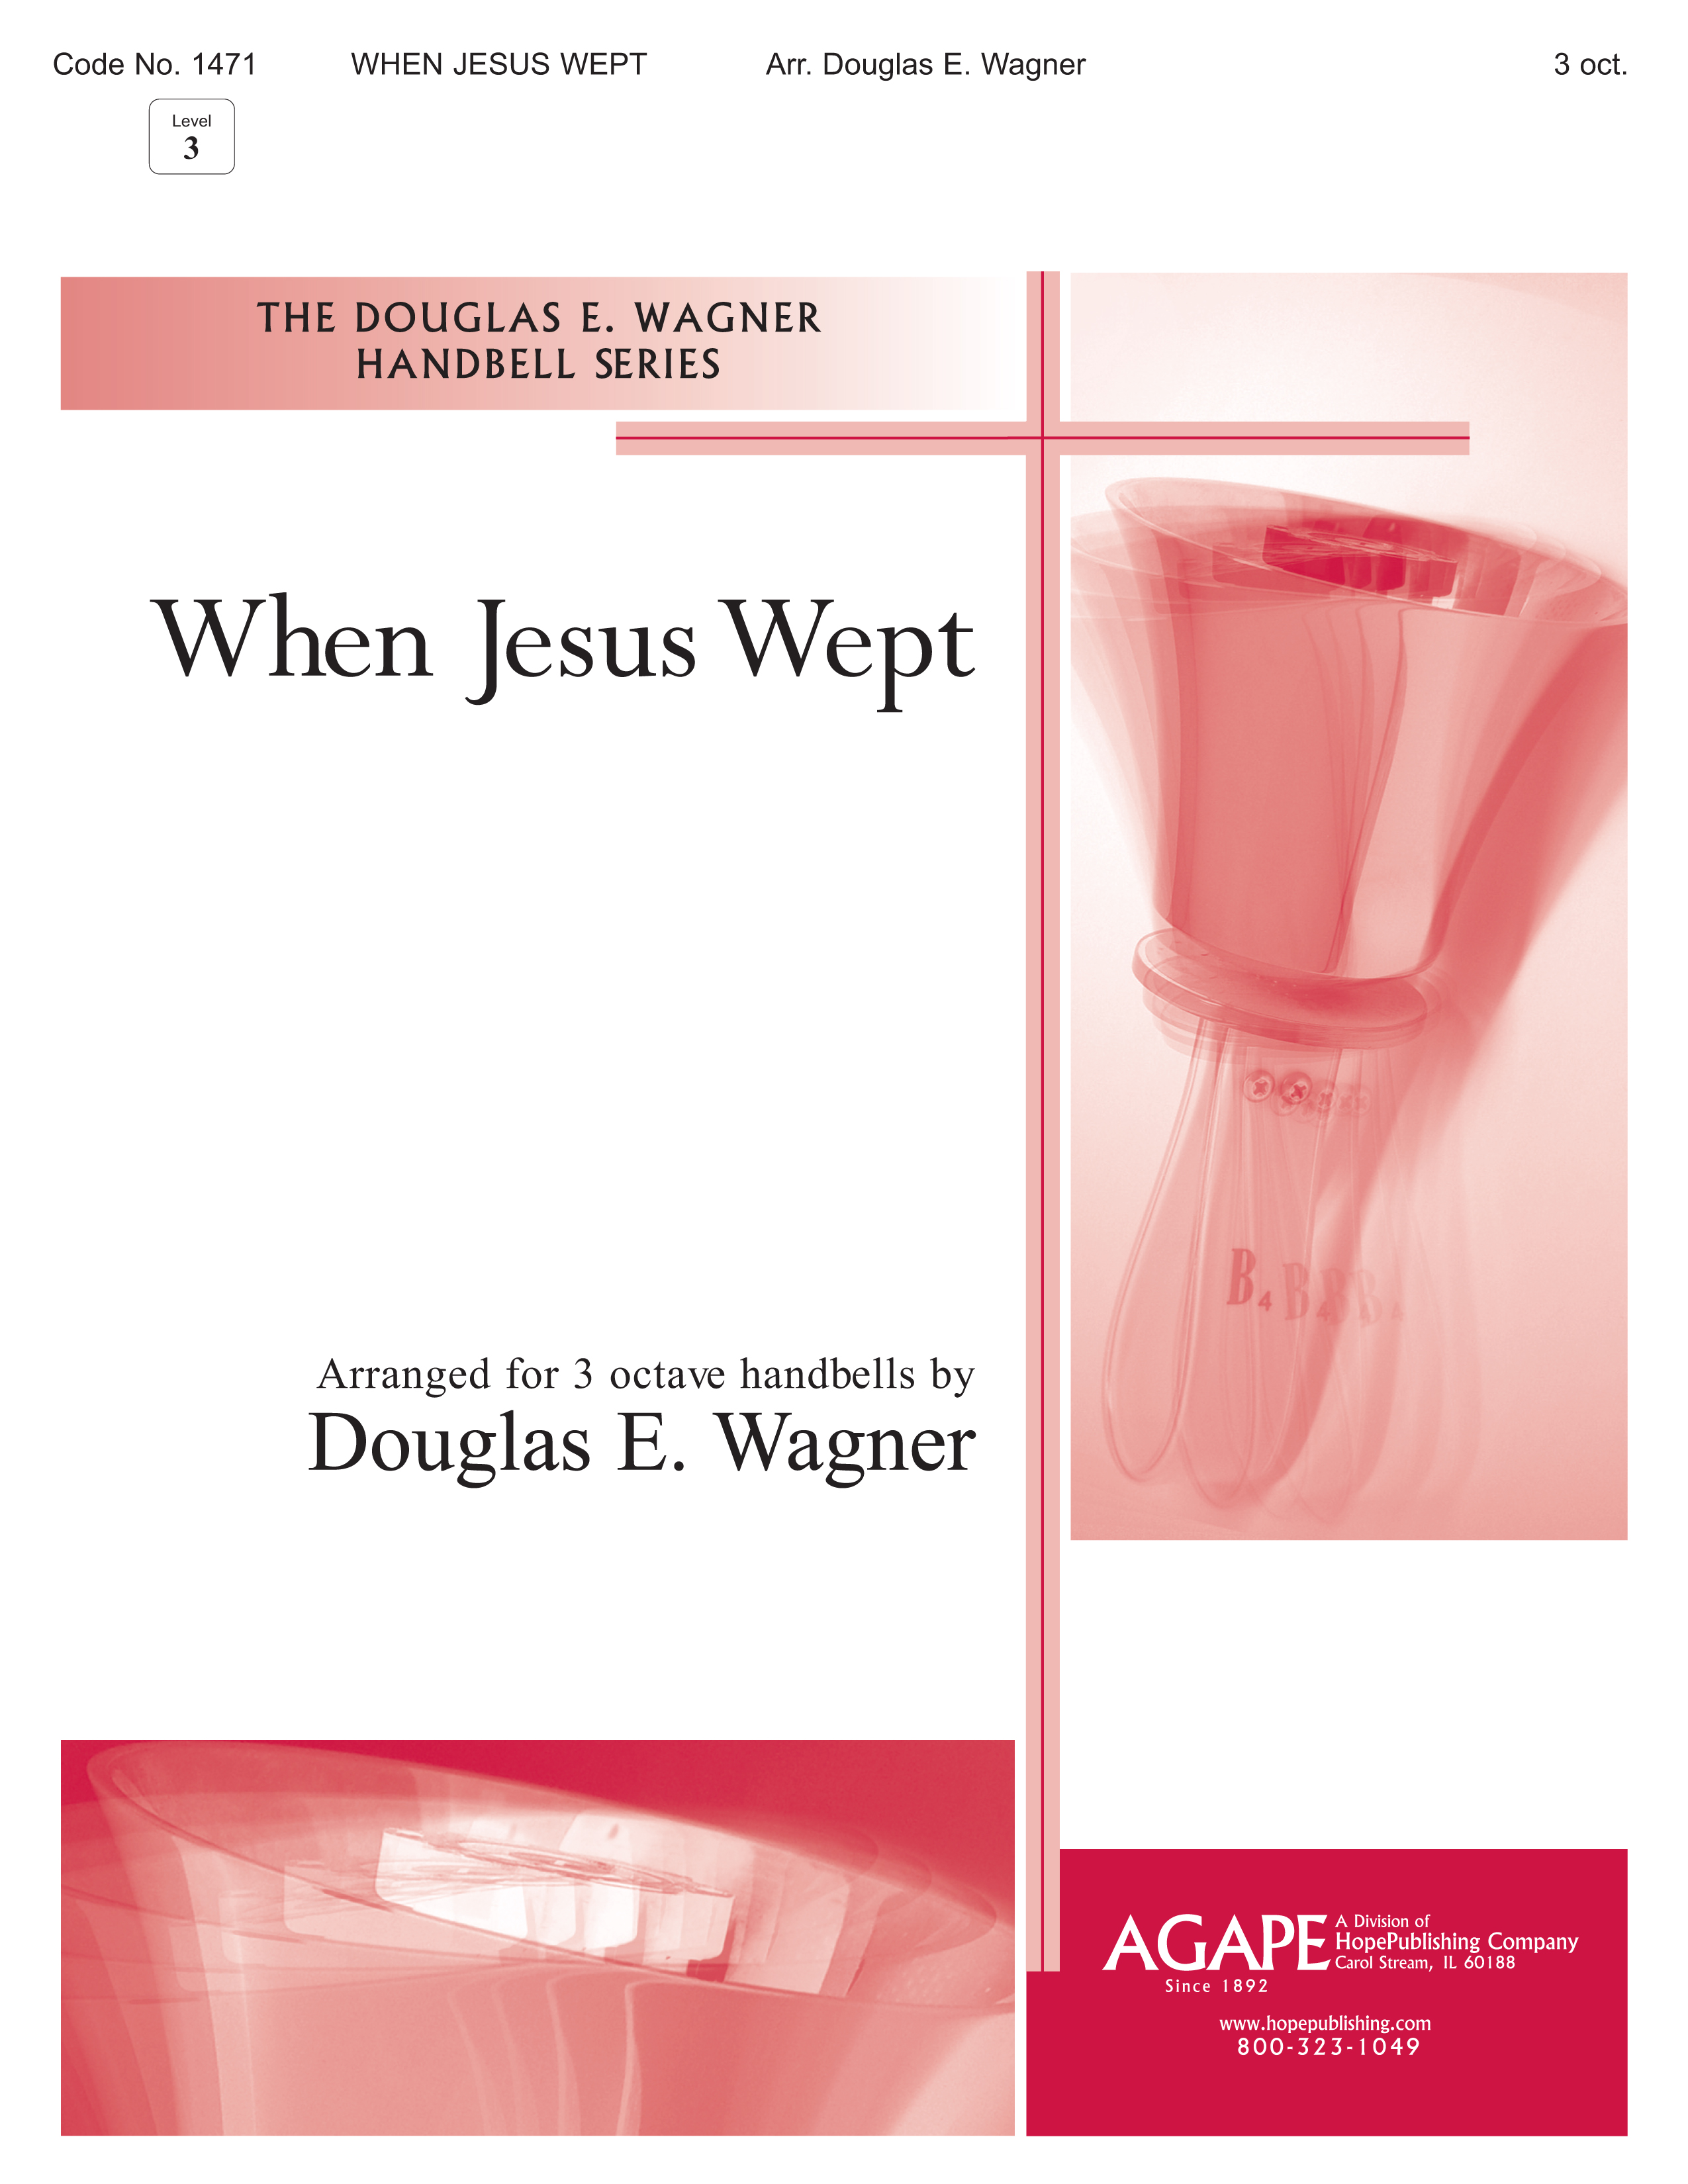 When Jesus Wept - 3 Oct. Cover Image